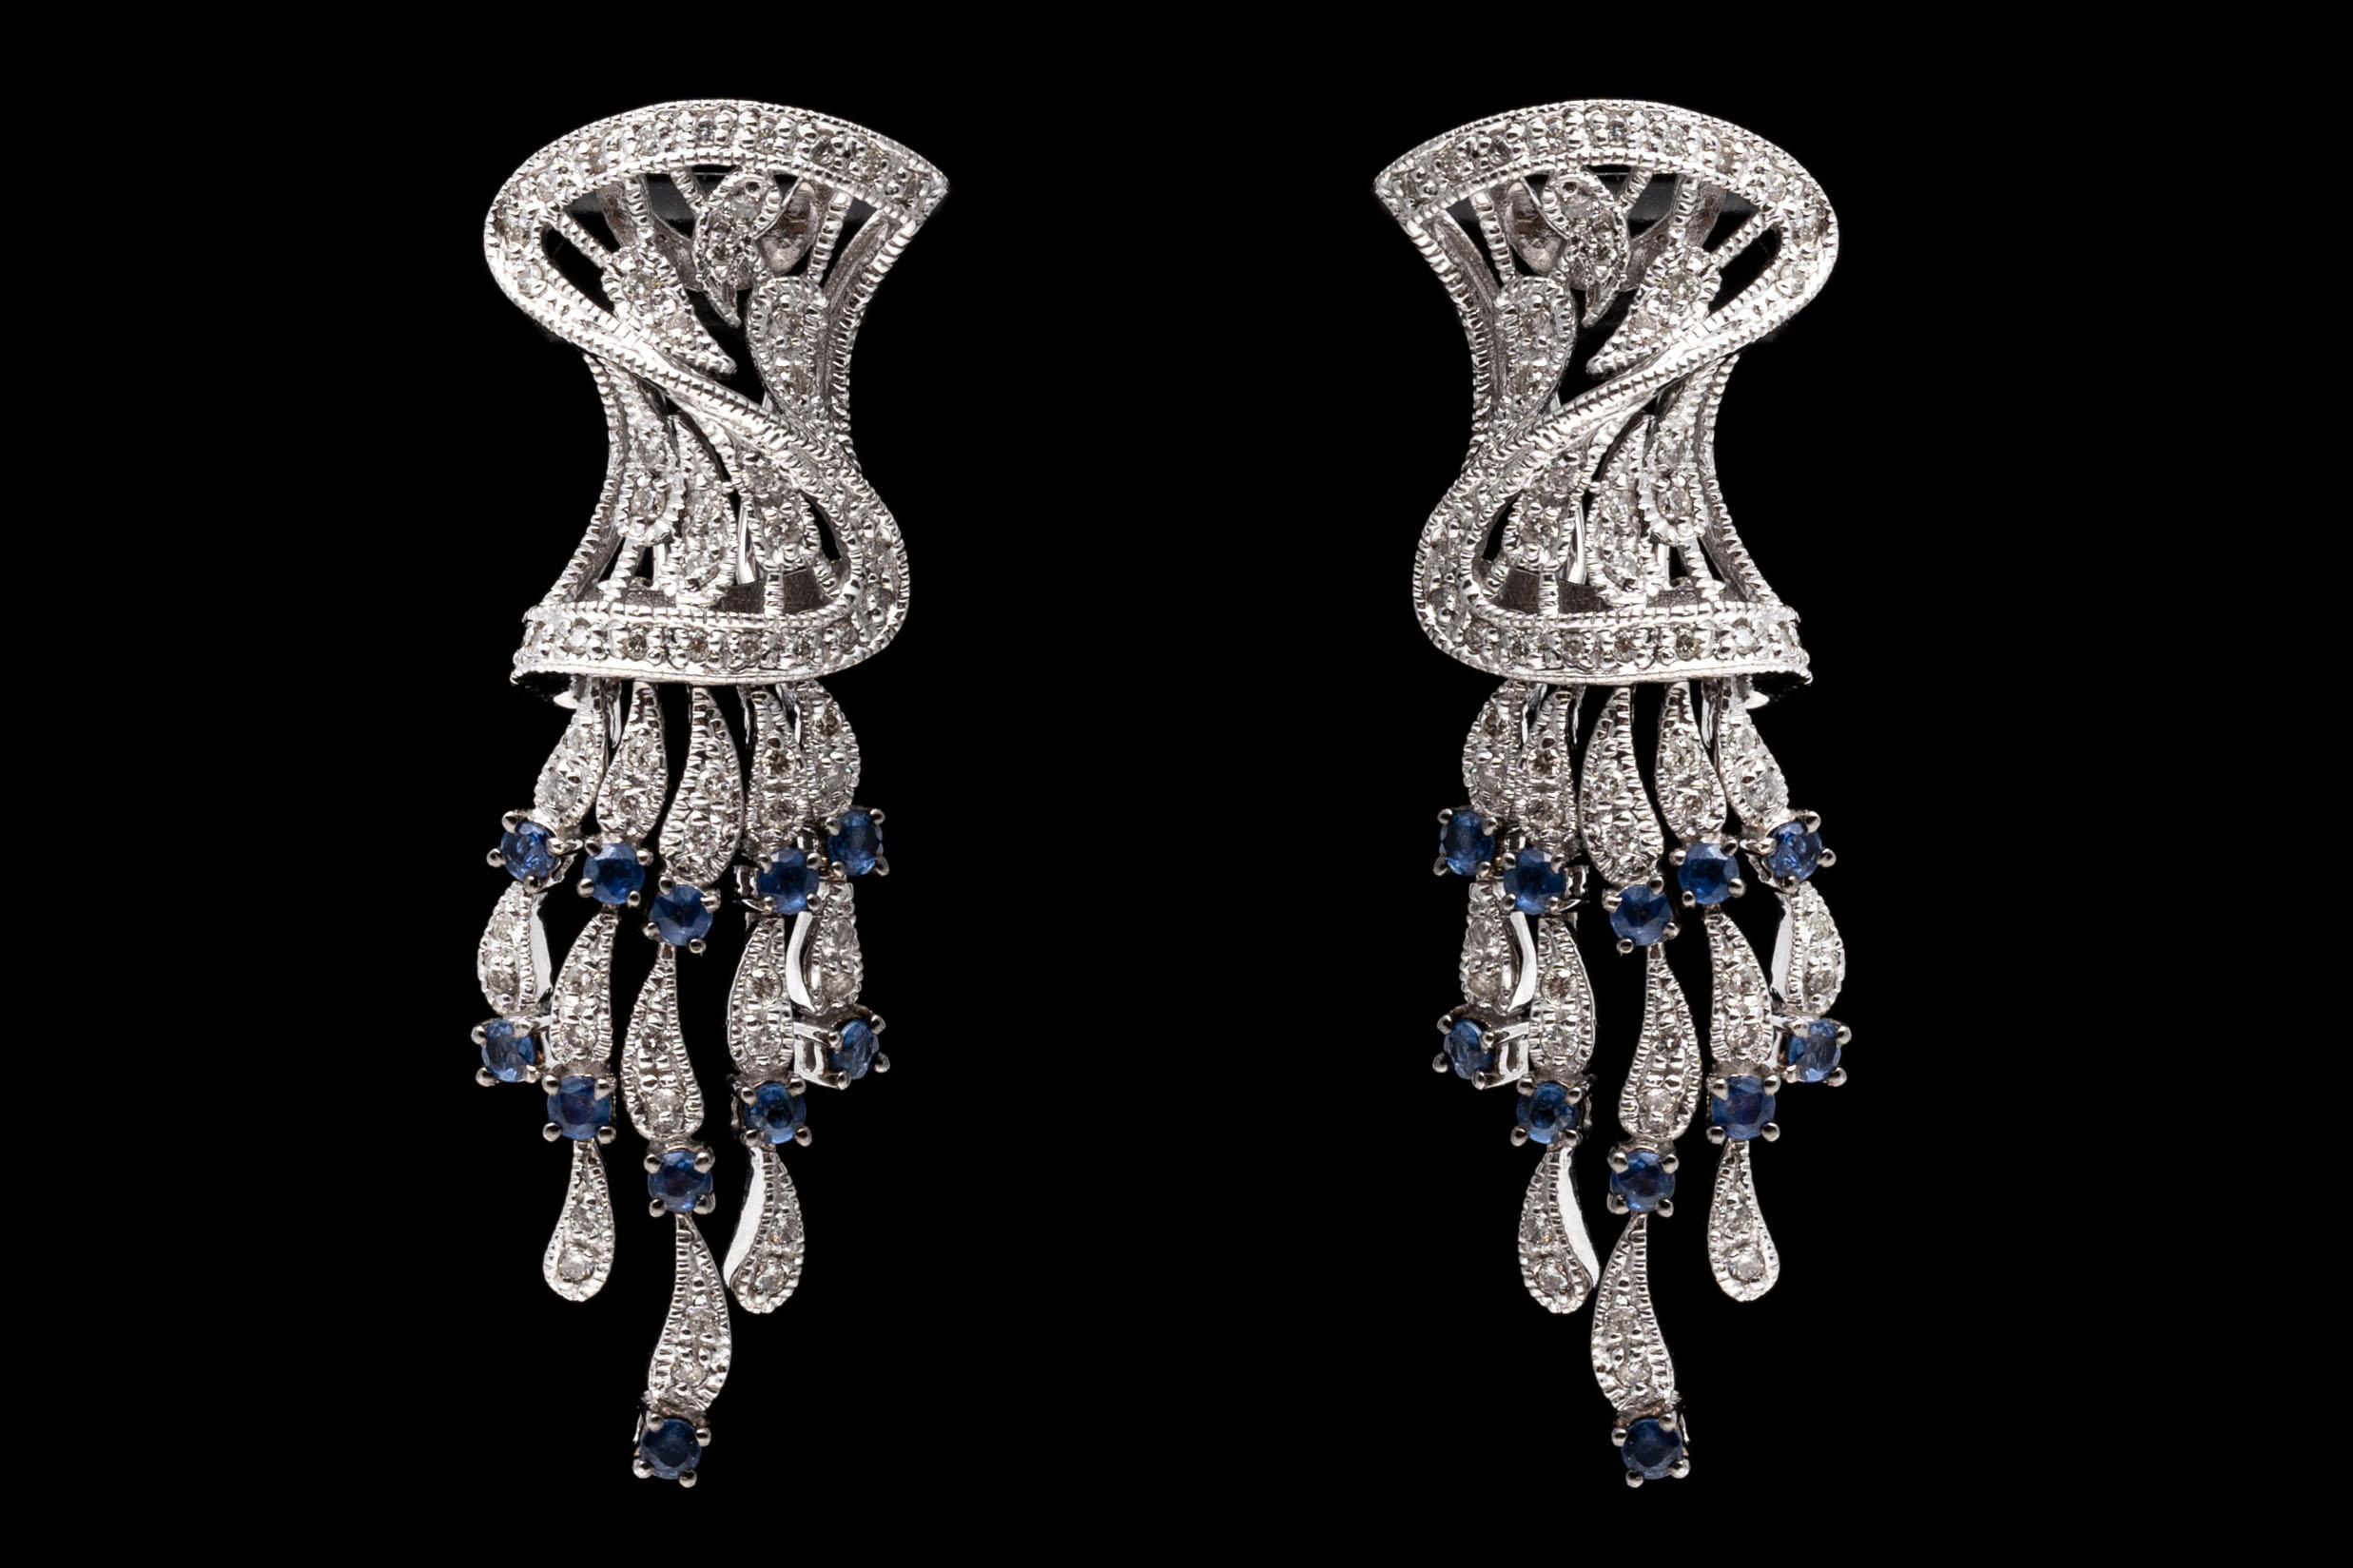 14k White Gold Spectacular Diamond and Sapphire Chandelier Earrings For Sale 4